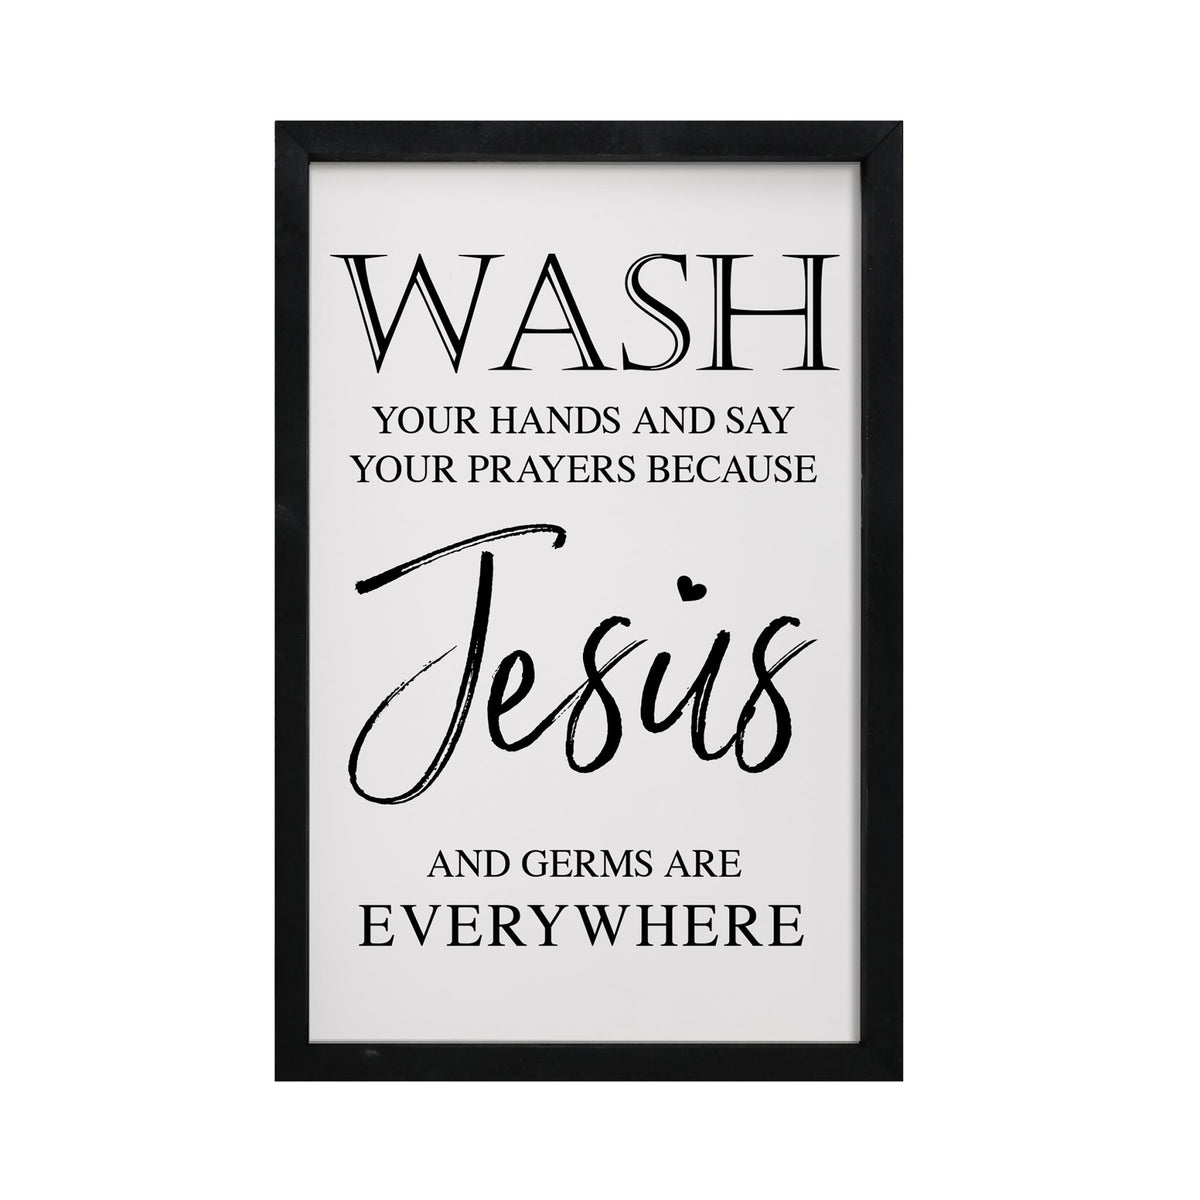 Funny Bathroom Decor Framed Shadow Box 7x10in (Wash Your Hands Jesus) - LifeSong Milestones